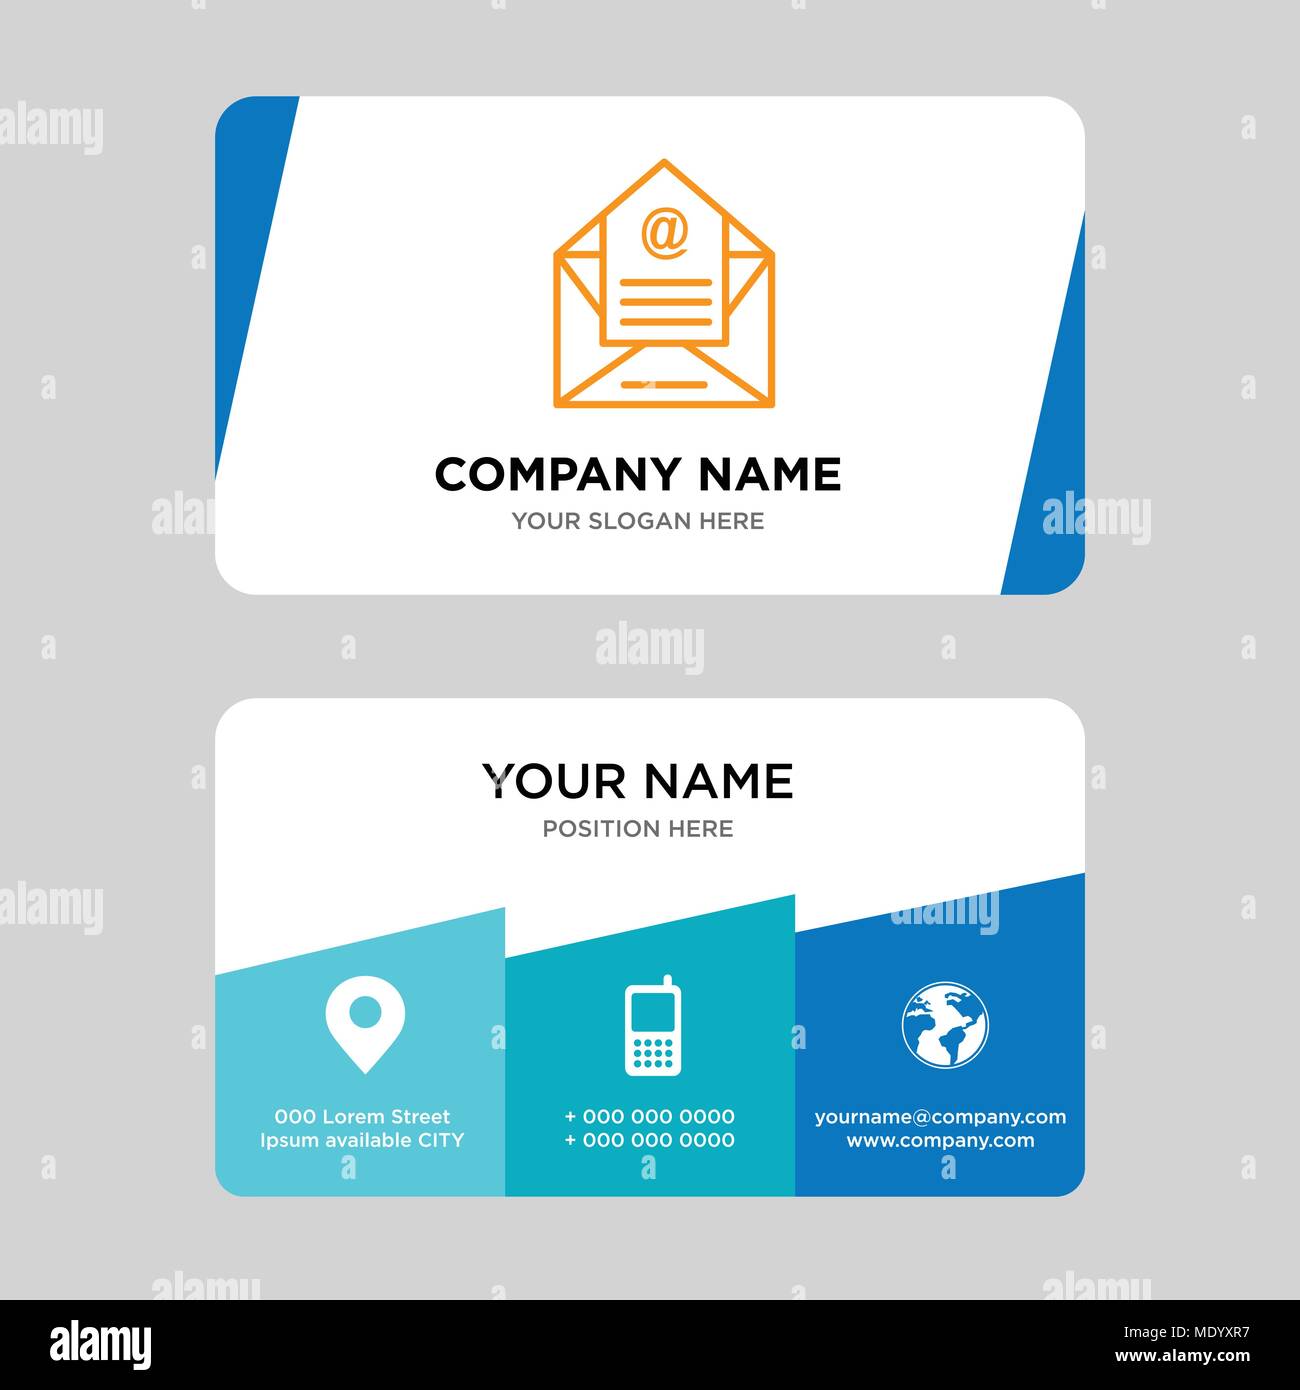 Email business card design template, Visiting for your company For Email Business Card Templates